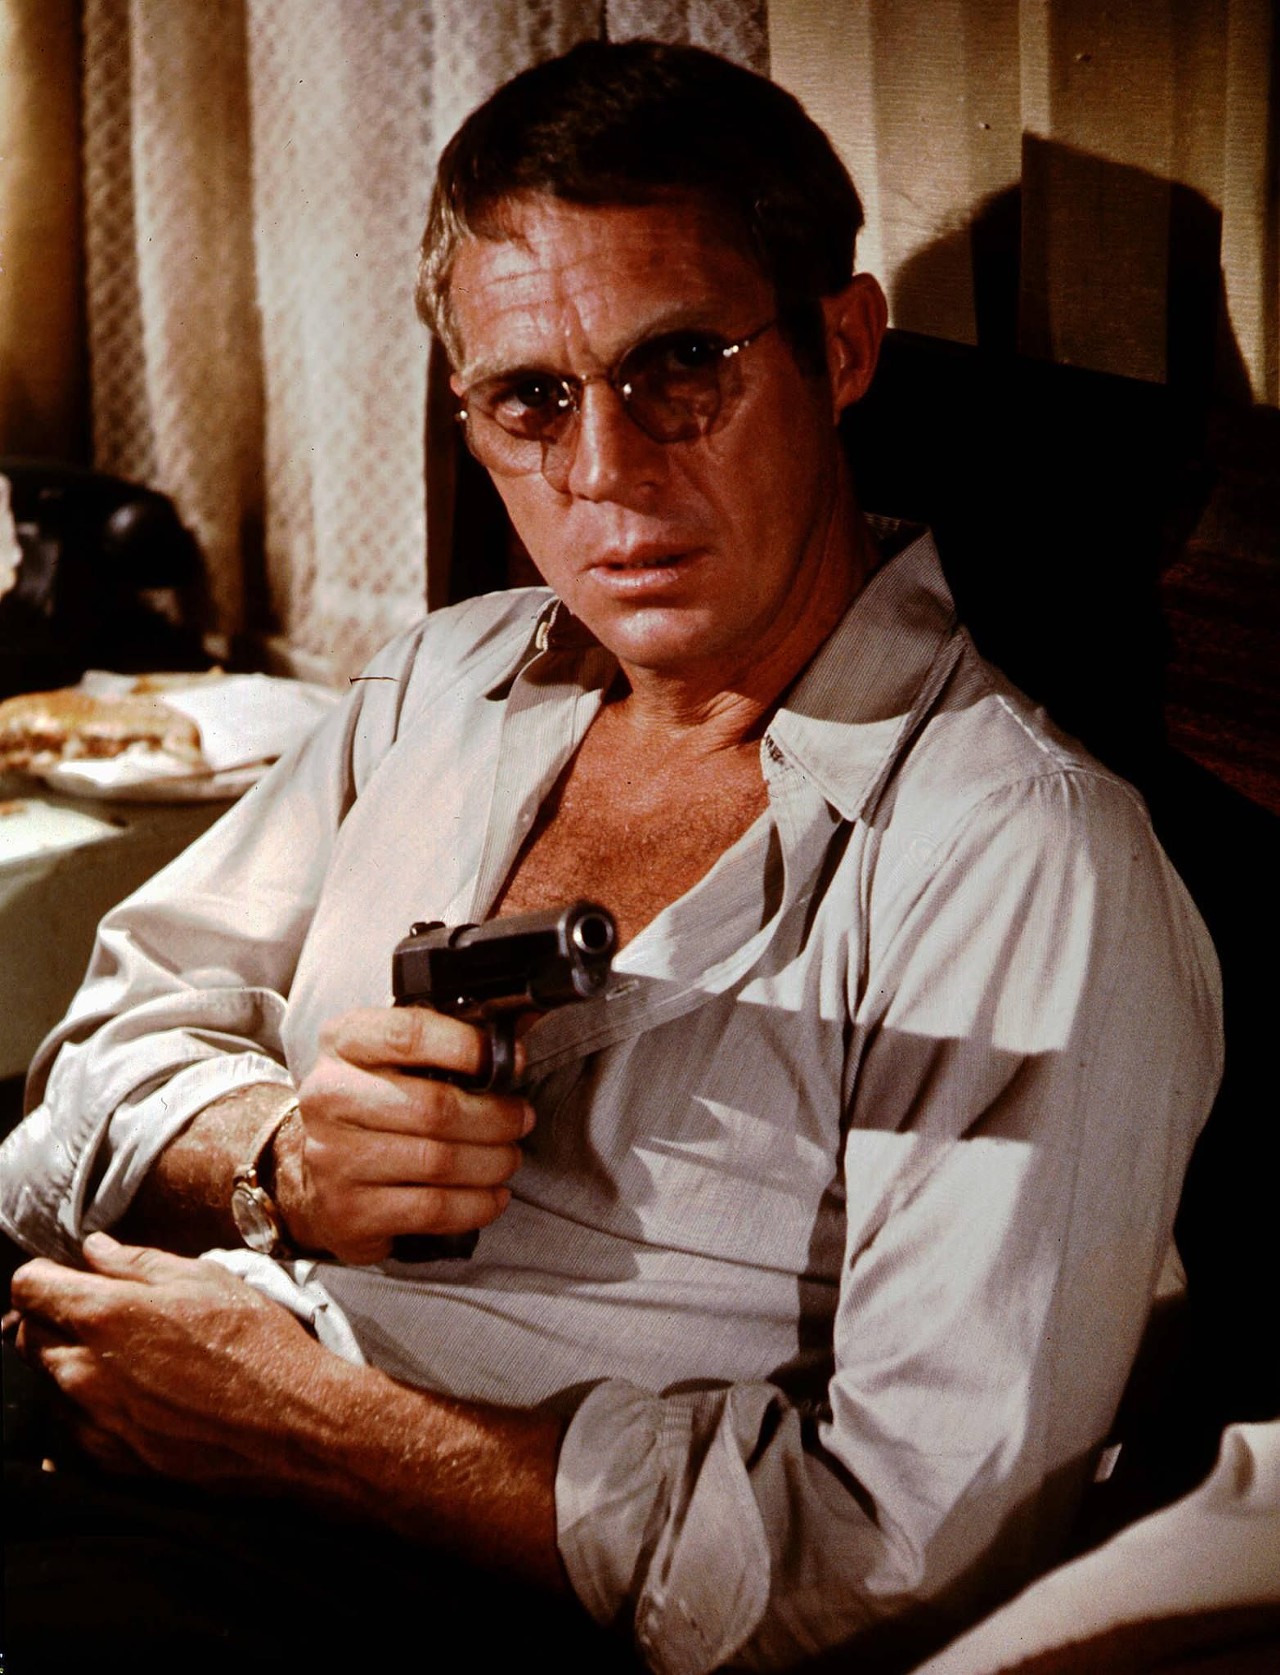 Steve McQueen – The Getaway
McQueen stars as Doc McCoy, an ex-con who goes on the run with his wife when a heist goes bad. 
Photo via First Artists